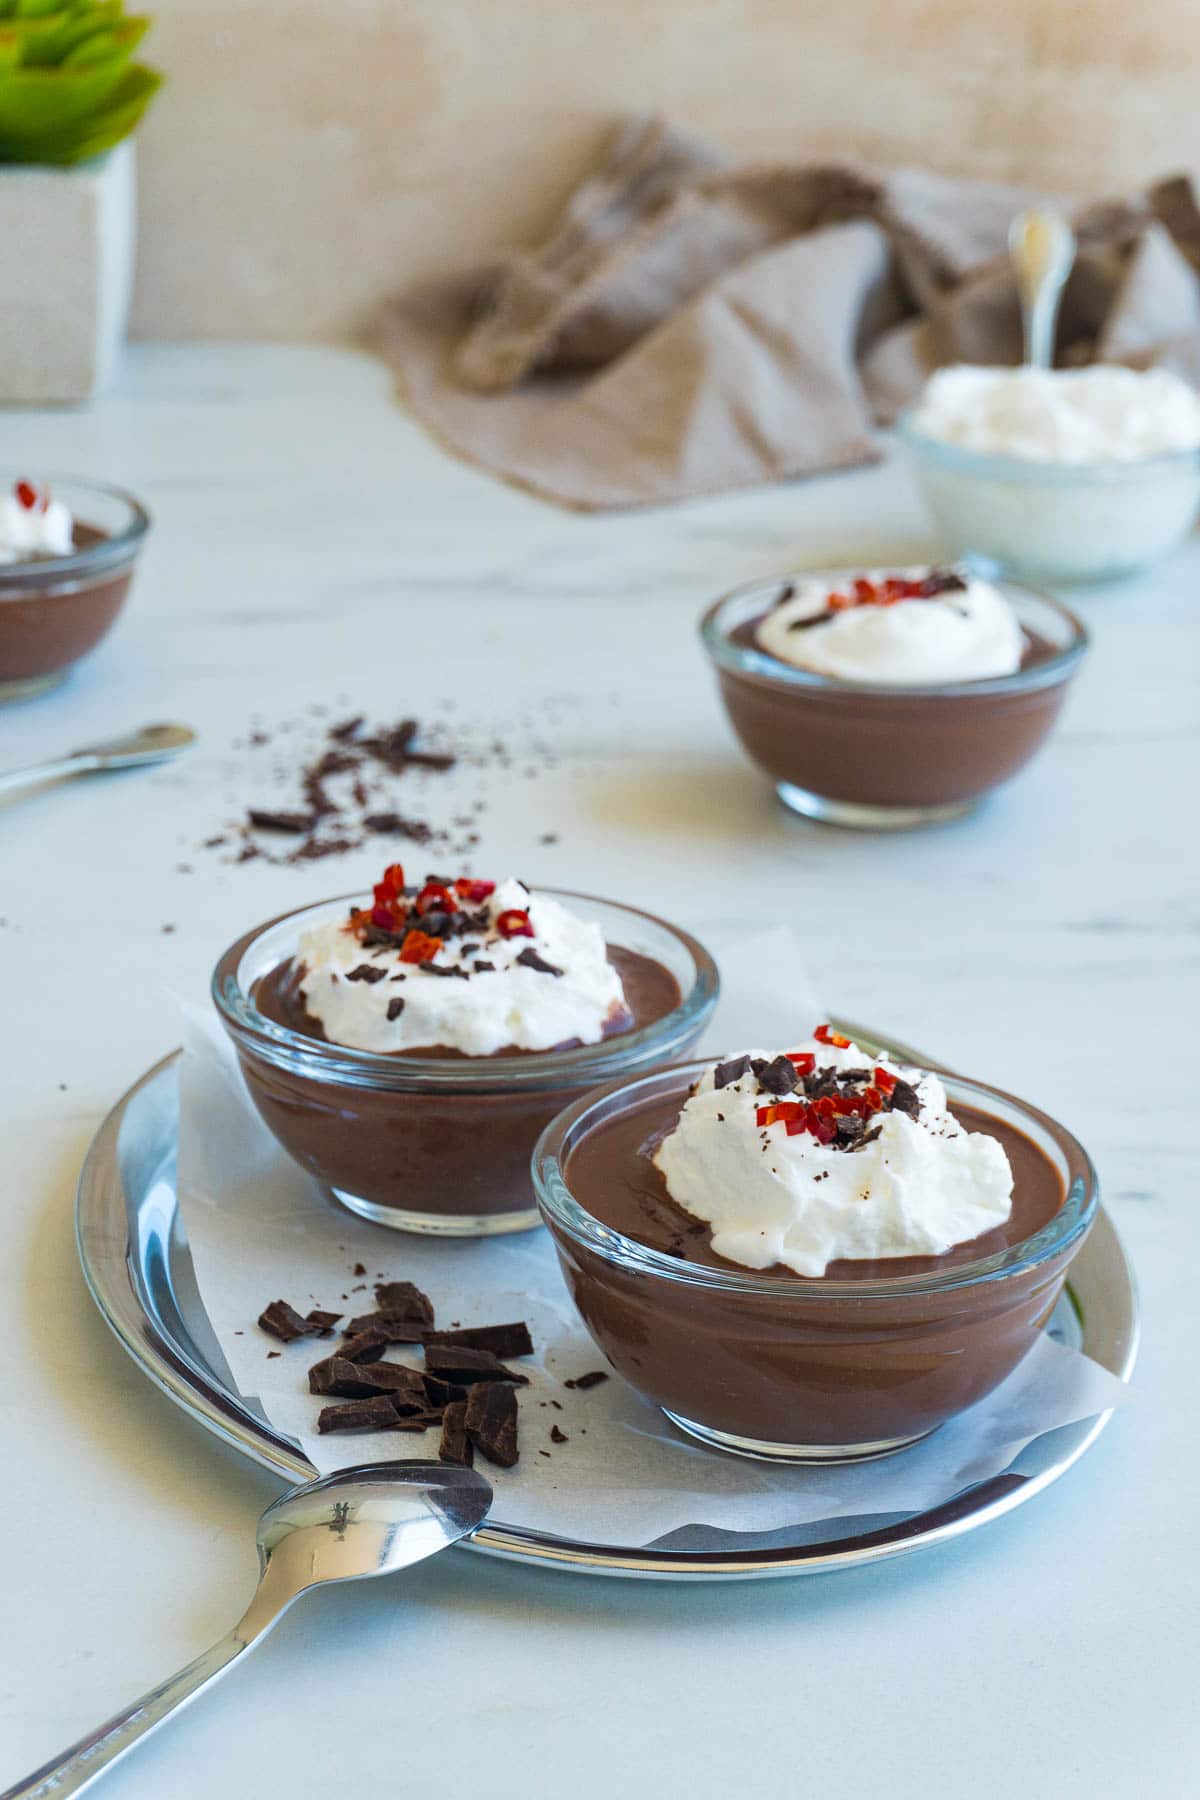 Two dark chocolate puddings on a tray with small chocolate pieces next to them.